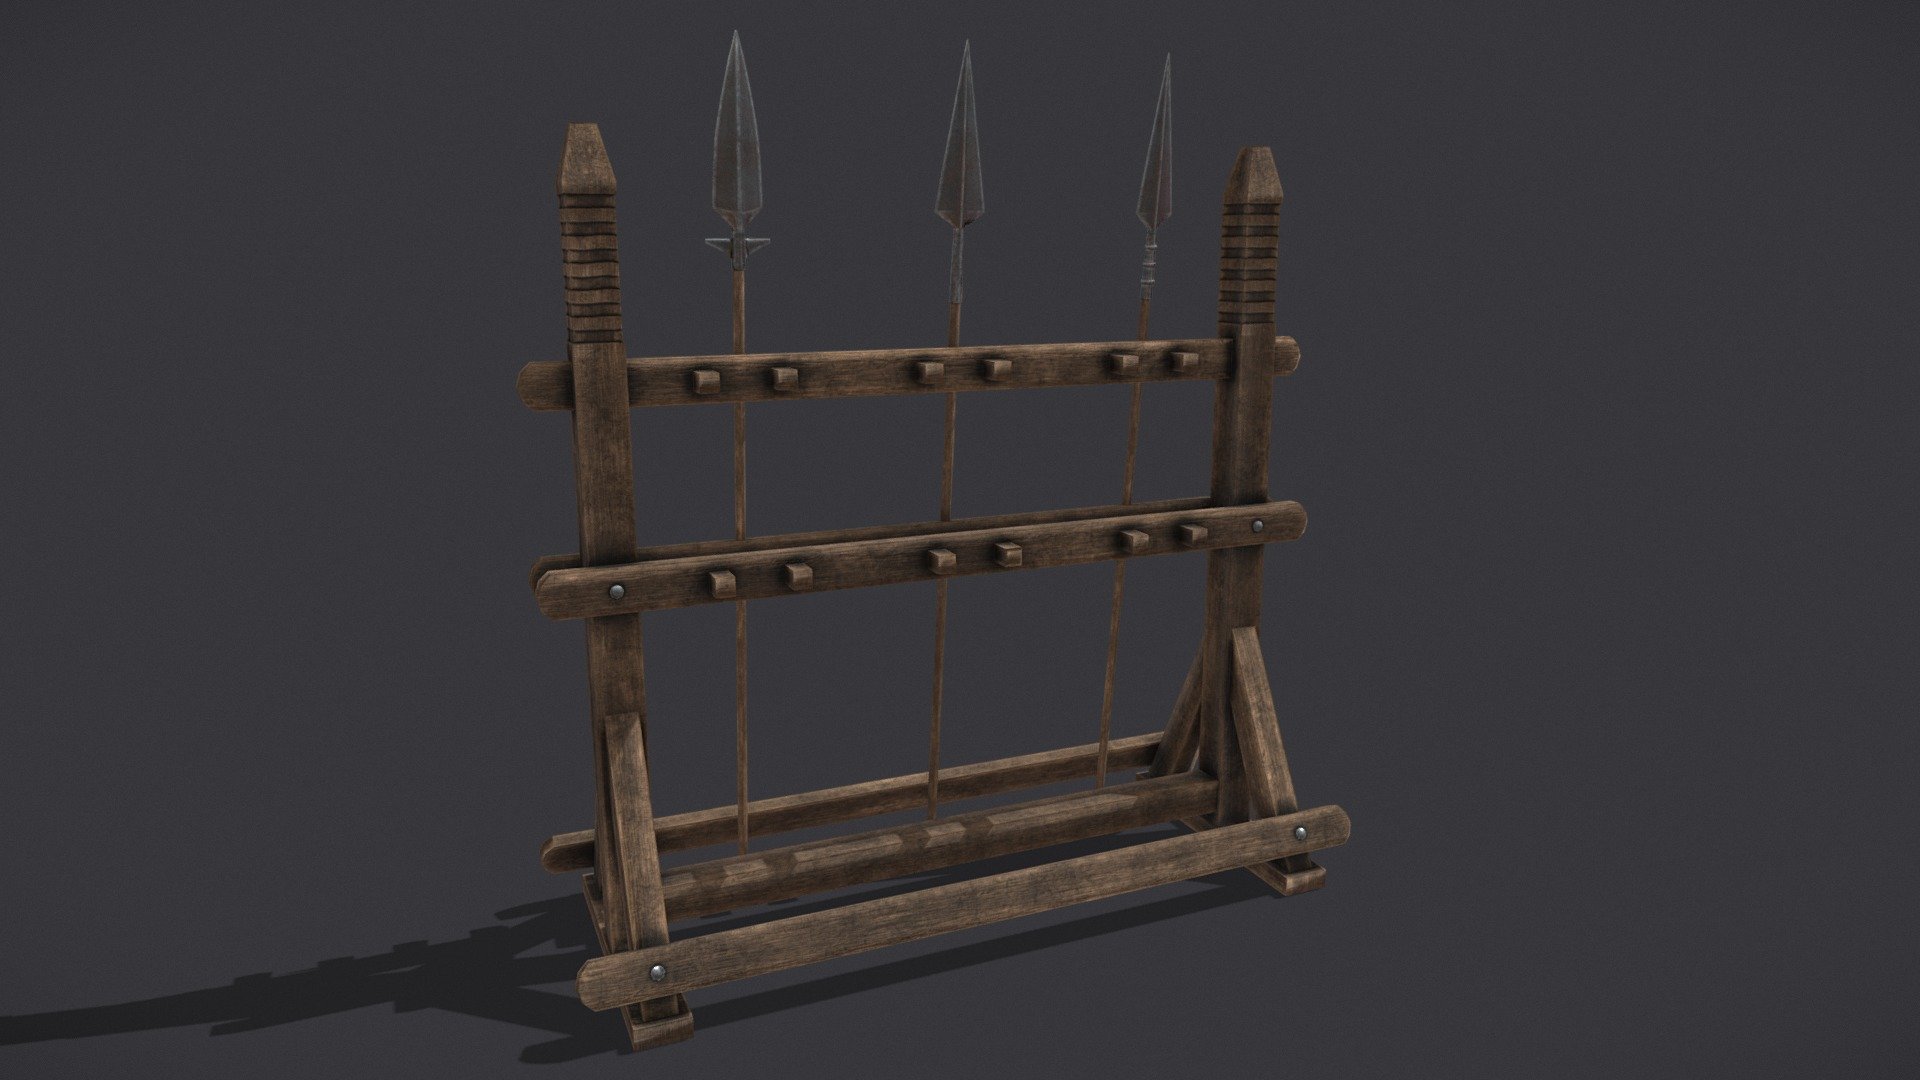 Medieval Spears and Stand 3D Game Prop PBR Texture 4K
Medieval Spears and Stand 3D Model PBR Texture available in 4096 x 4096 Maps include : Basecolor, Normal, Roughness, Height. 
 Scaled to real world scale. Customer Service Guaranteed. From the Creators at Get Dead Entertainment. Please like and Rate! Follow us on FaceBook and Instagram to keep updated on all our newest models - Medieval Spears and Stand - Buy Royalty Free 3D model by GetDeadEntertainment 3d model